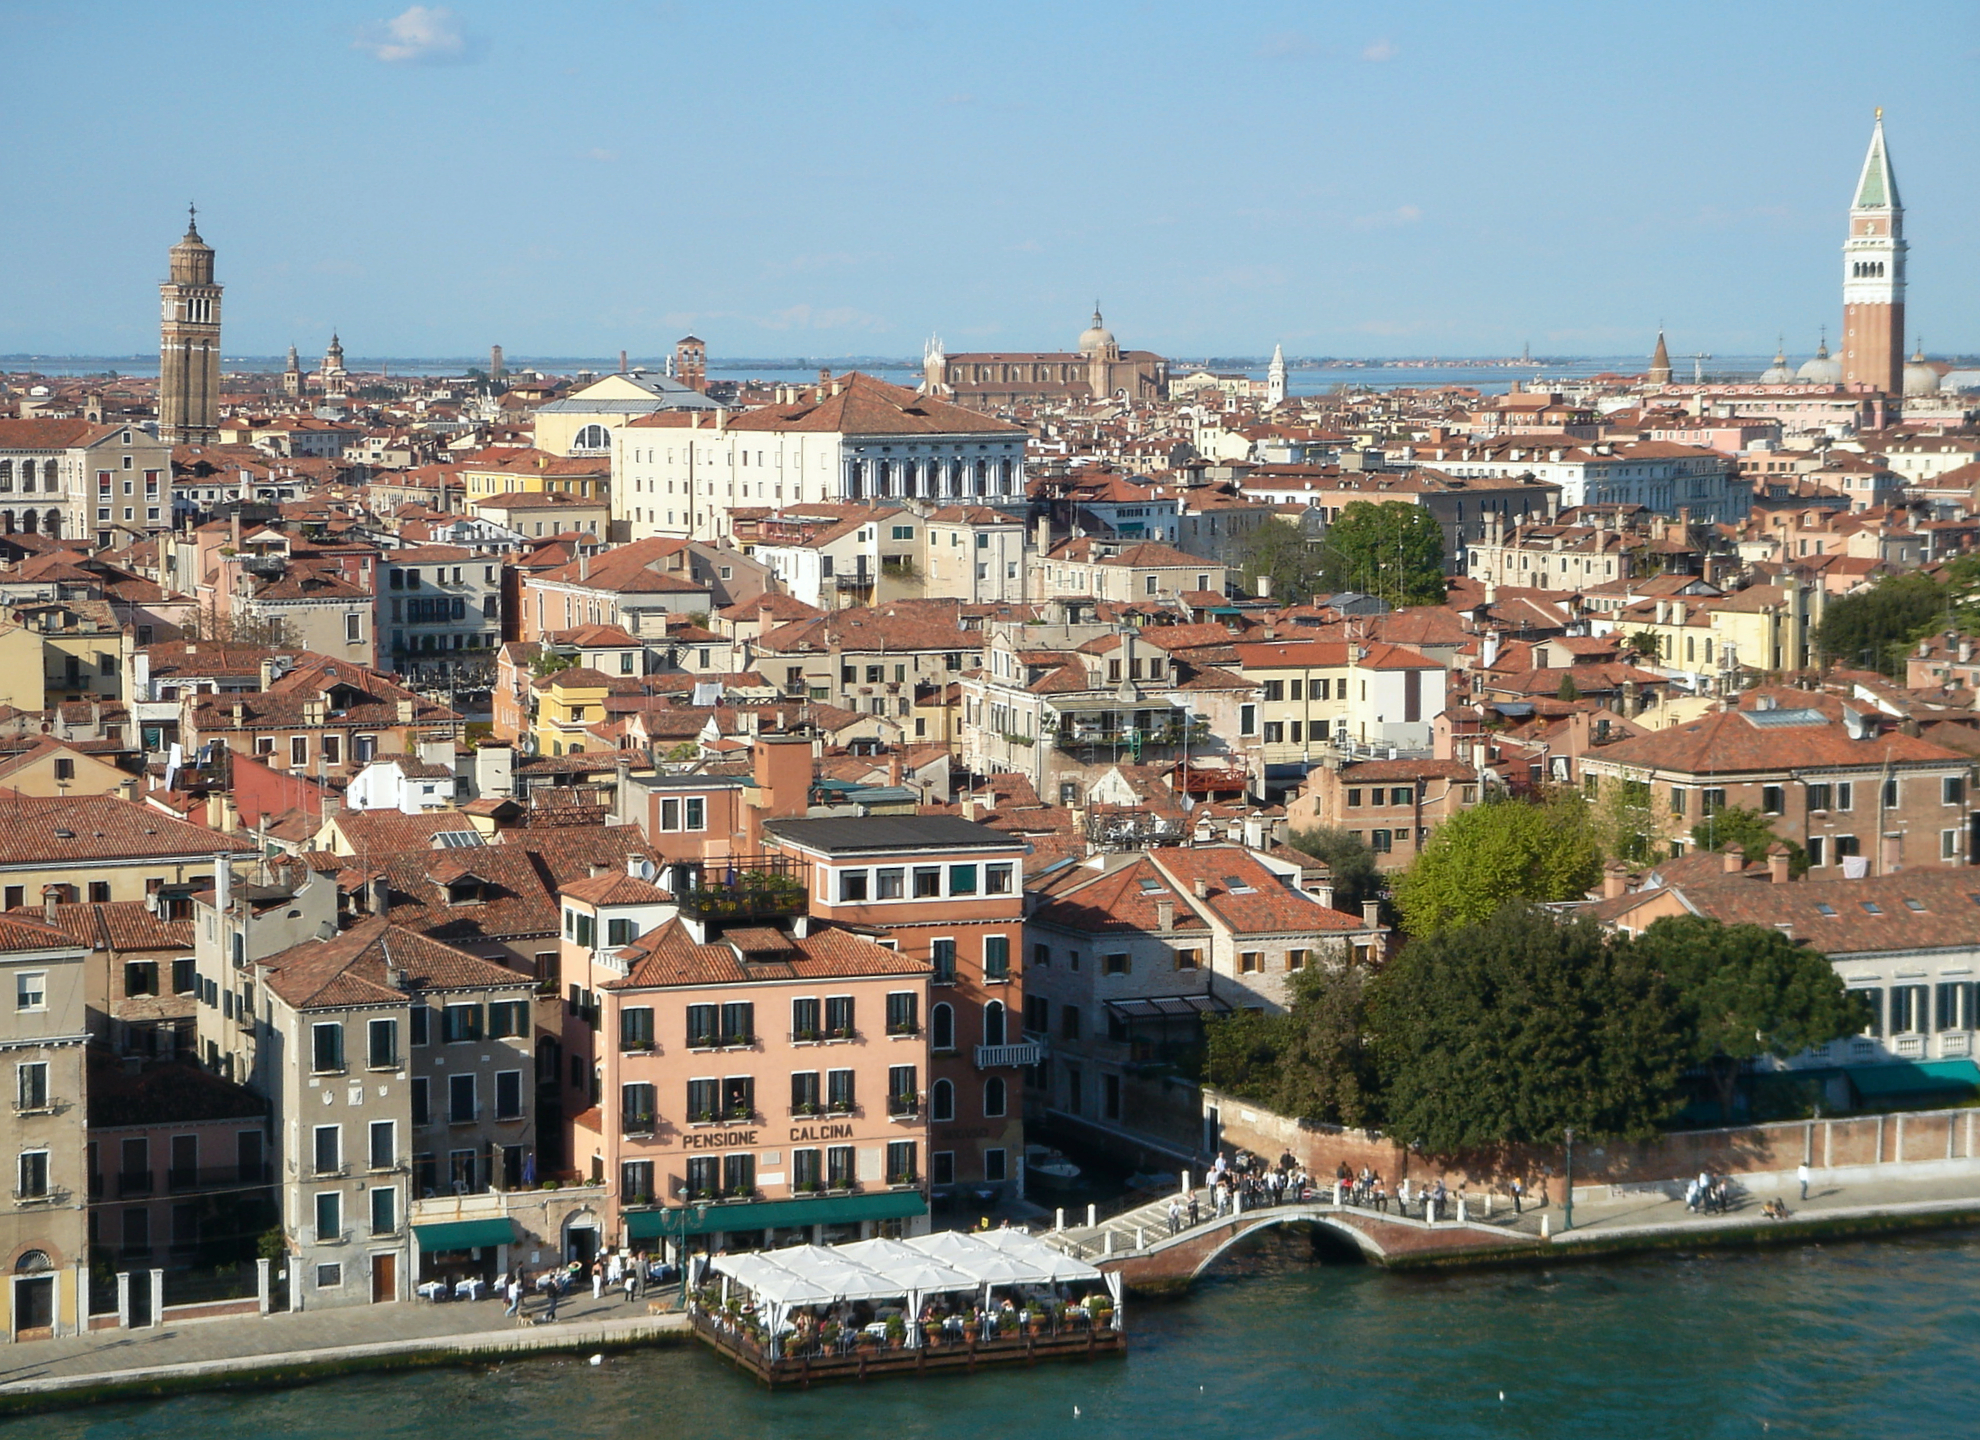 venice-view-from-ship-2-2008.jpg